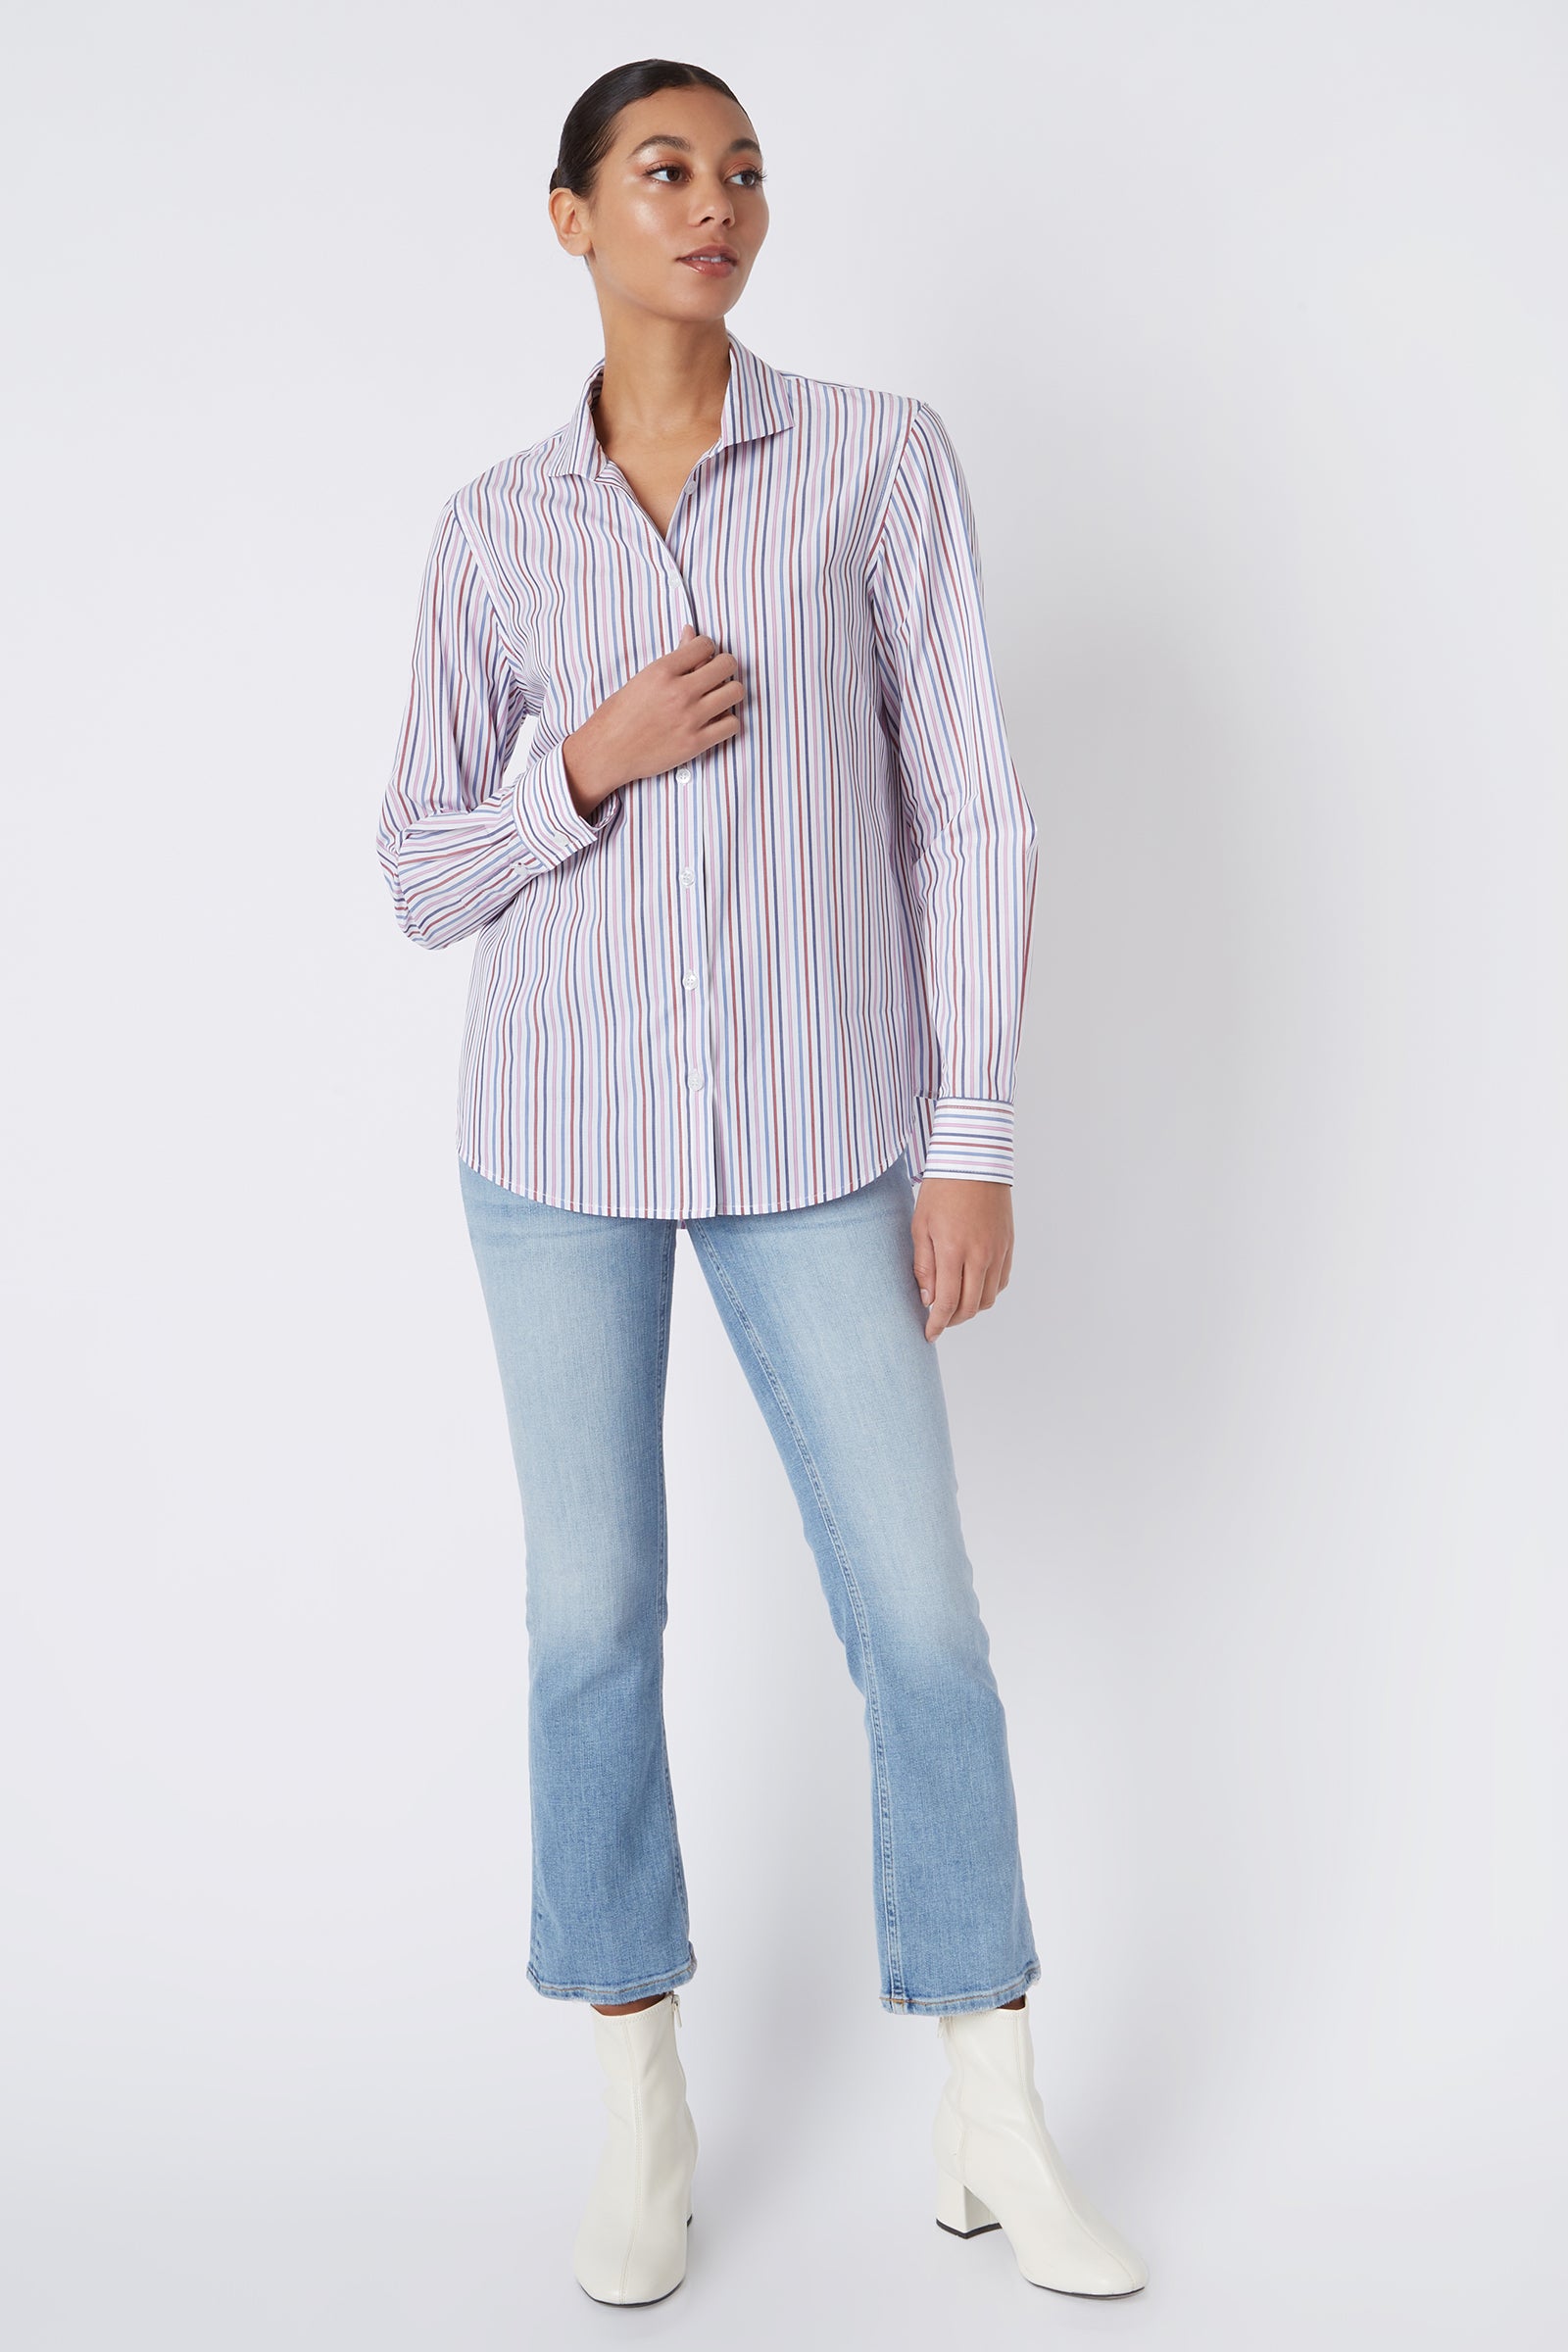 kal rieman ginna box pleat tailored shirting in cotton multi stripe pink on model front view full